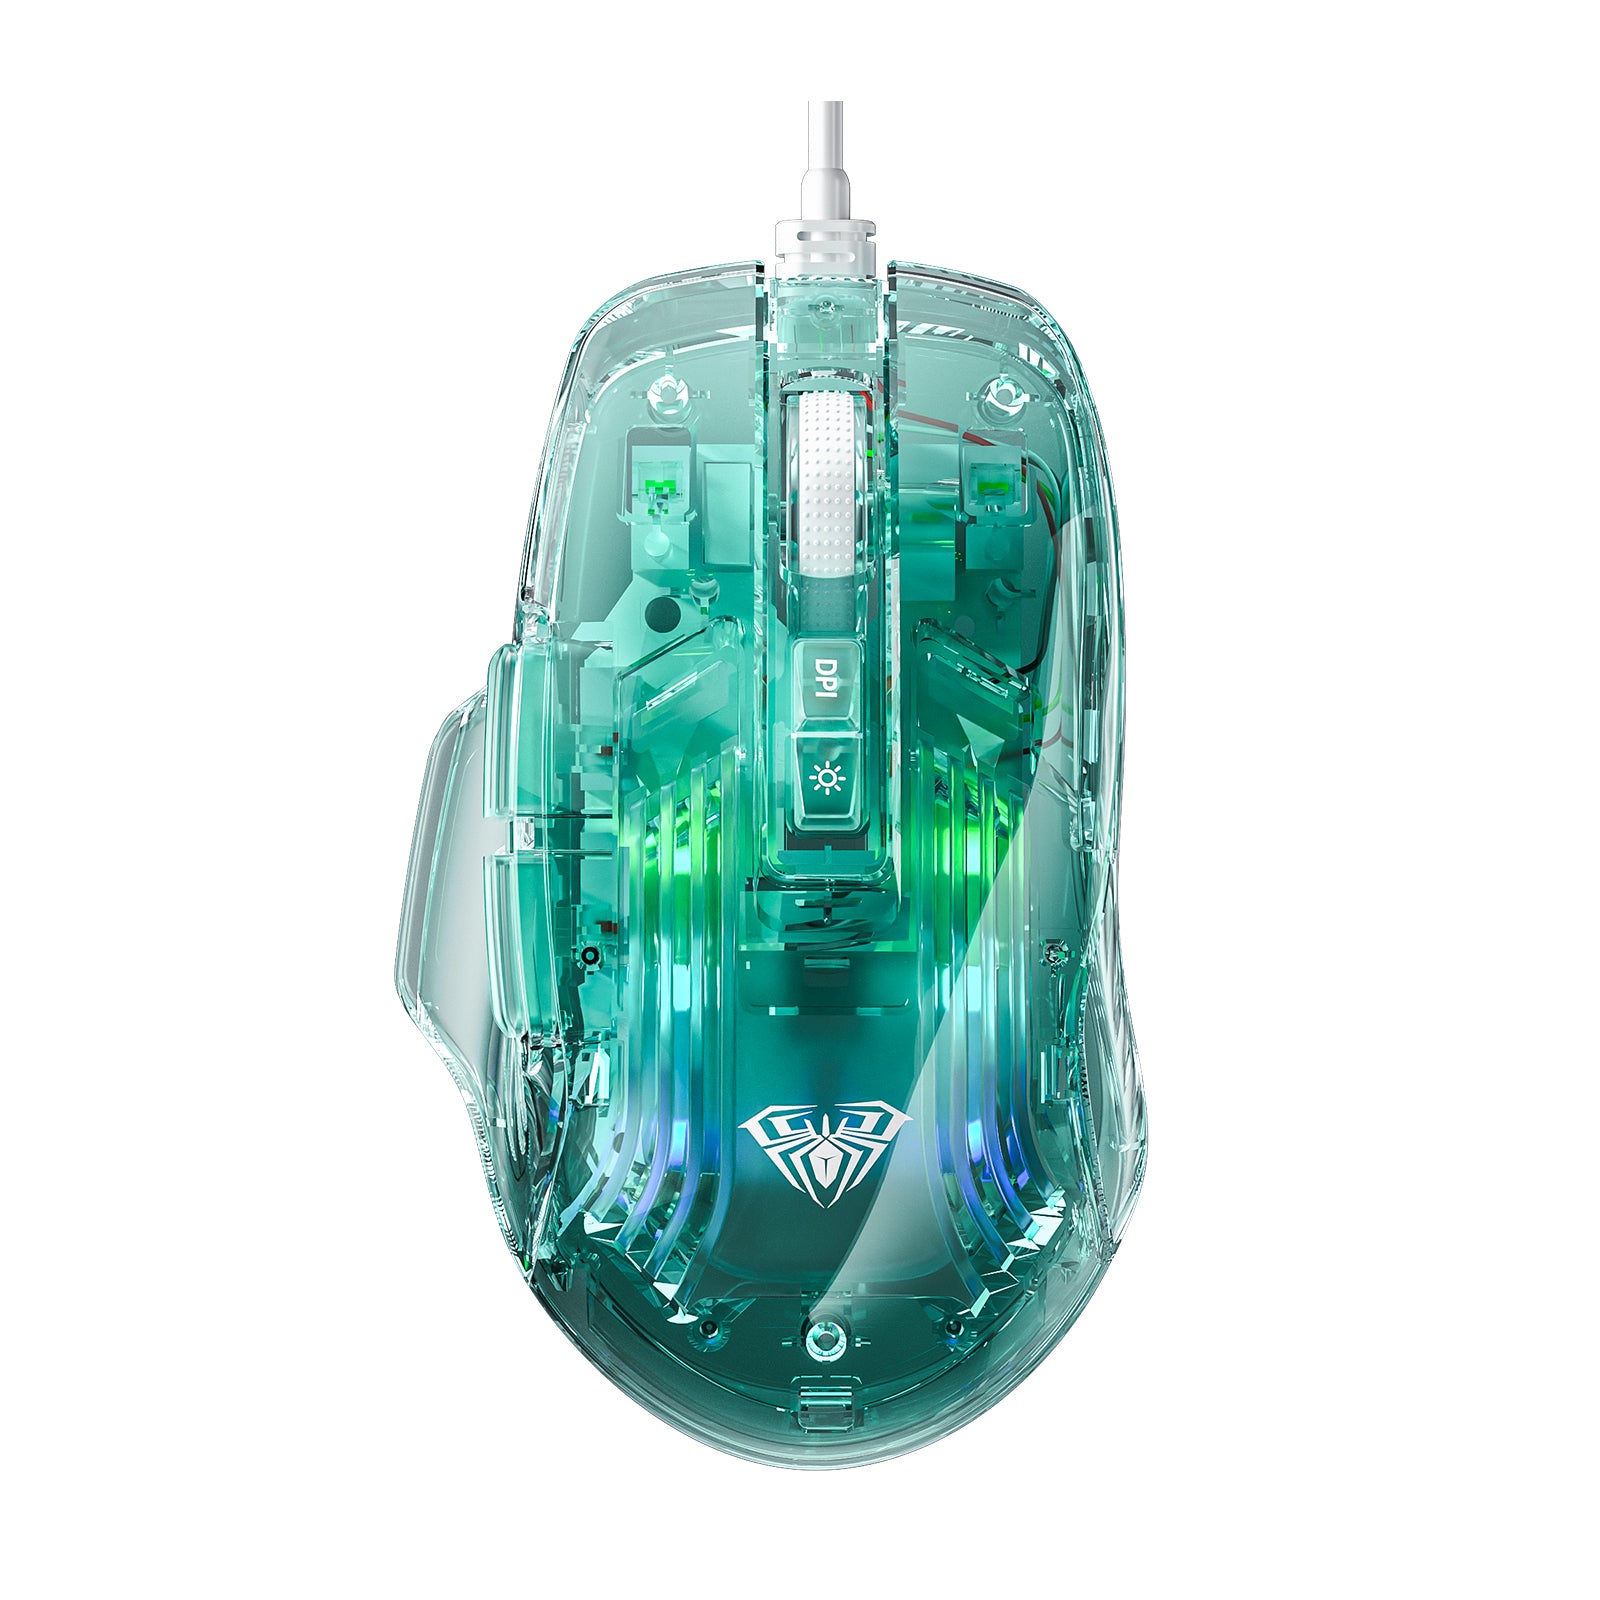 Aula S80 Wired Optical Mouse